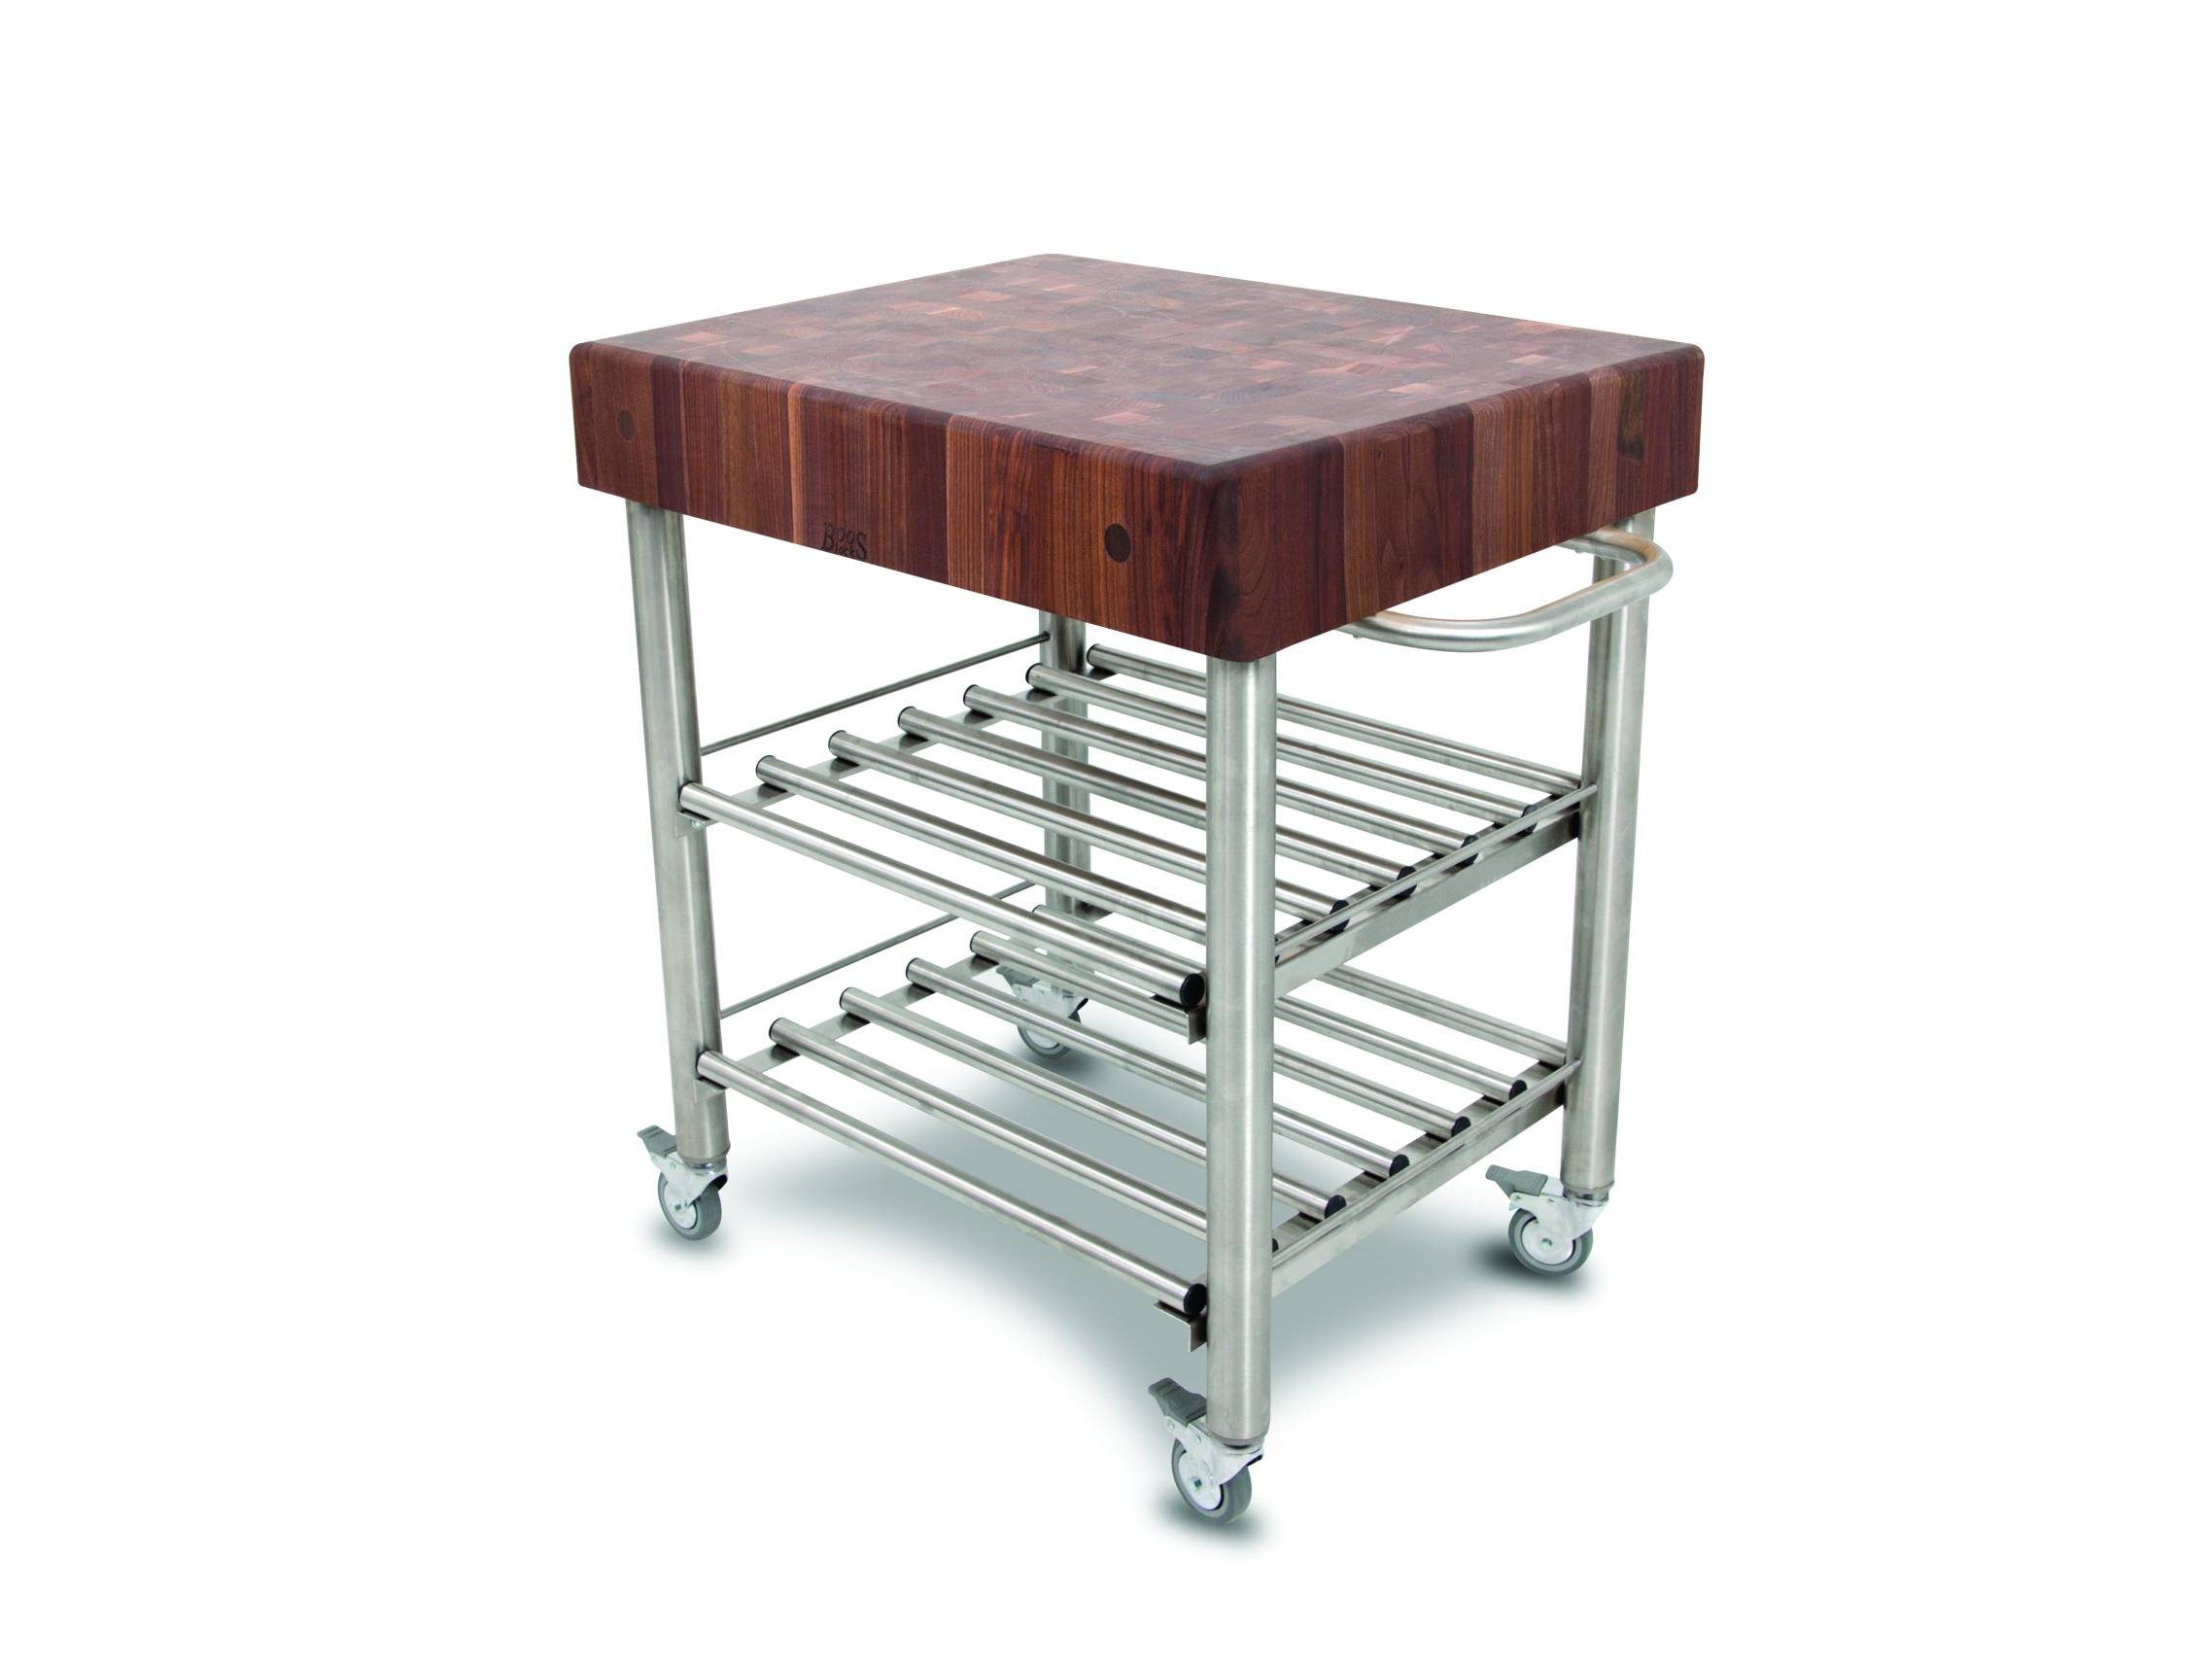 Cucina Kitchen &amp; Wine serving cart with Black Walnut end grain countertop and stainless steel base with 2 shelves, towel rack; lockable casters; 63